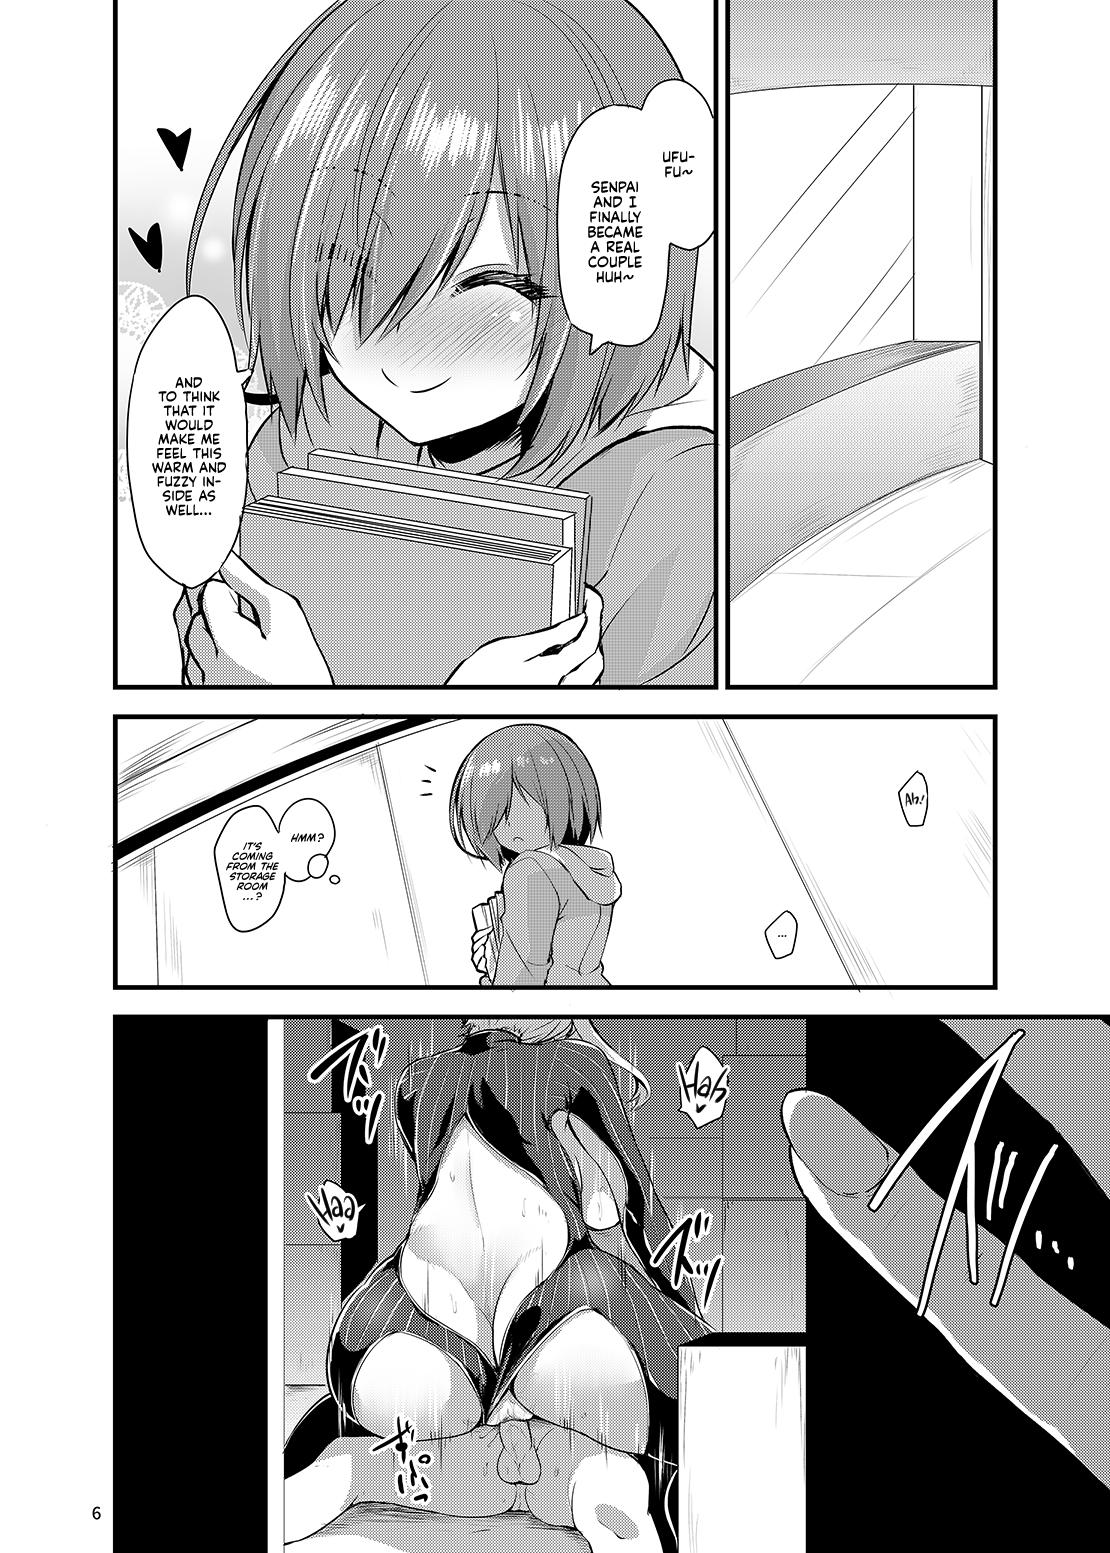 Gloryholes A Book About a Corrupted Mash Recklessly Making Love to Her NTR'd Master - Fate grand order Work - Page 5